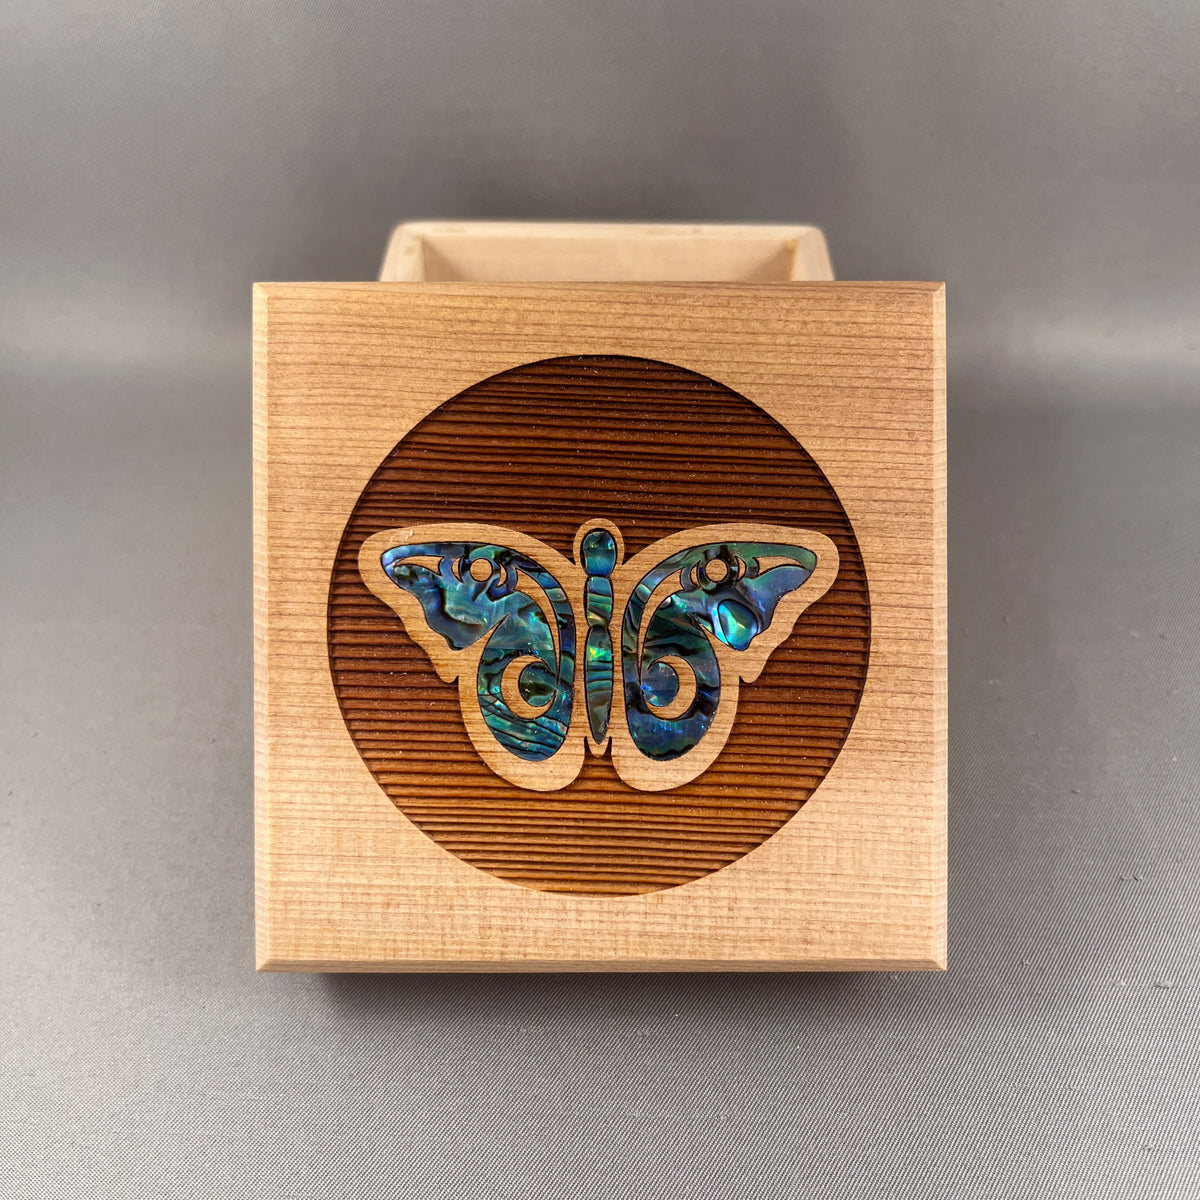 Bentwood Box - "Butterfly"